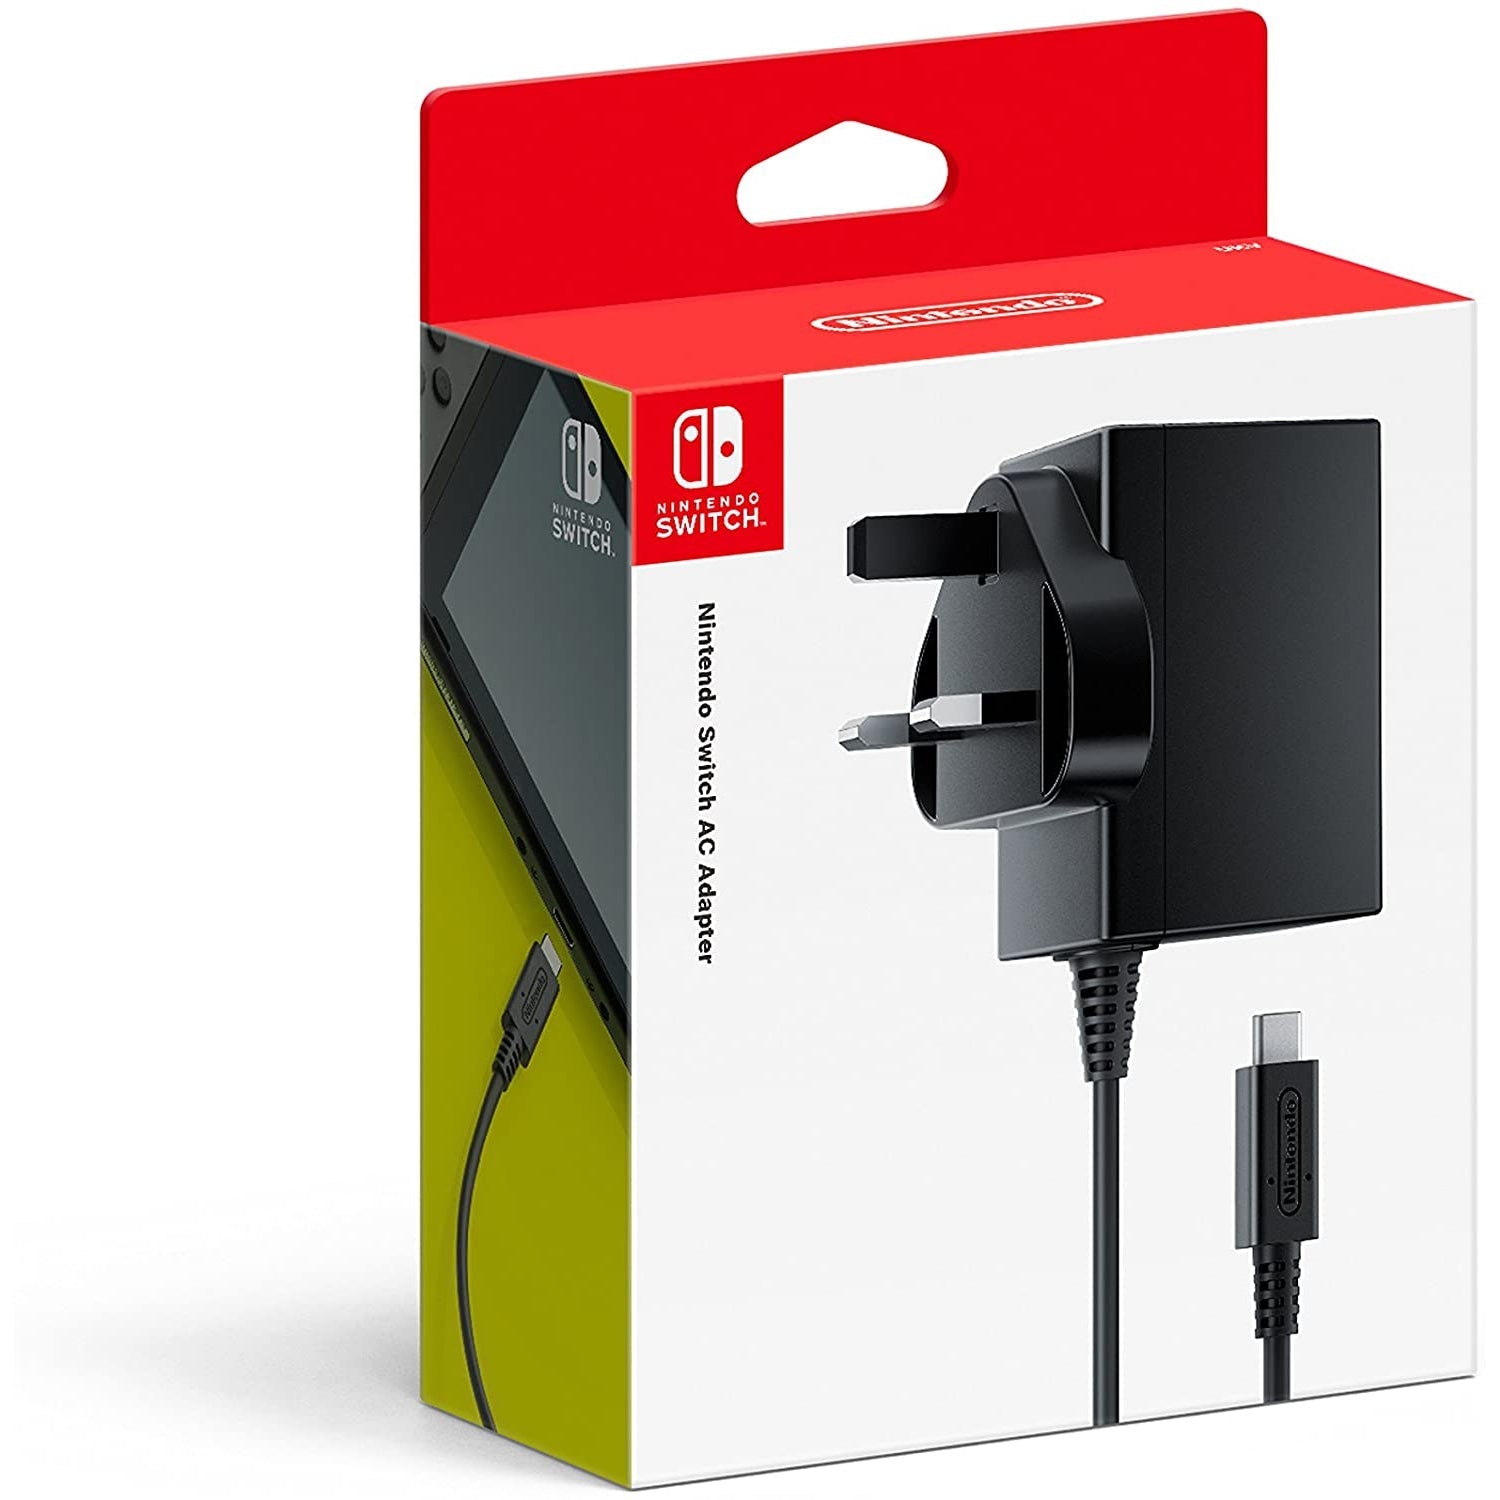 Nintendo Switch AC Adapter - Refurbished Excellent